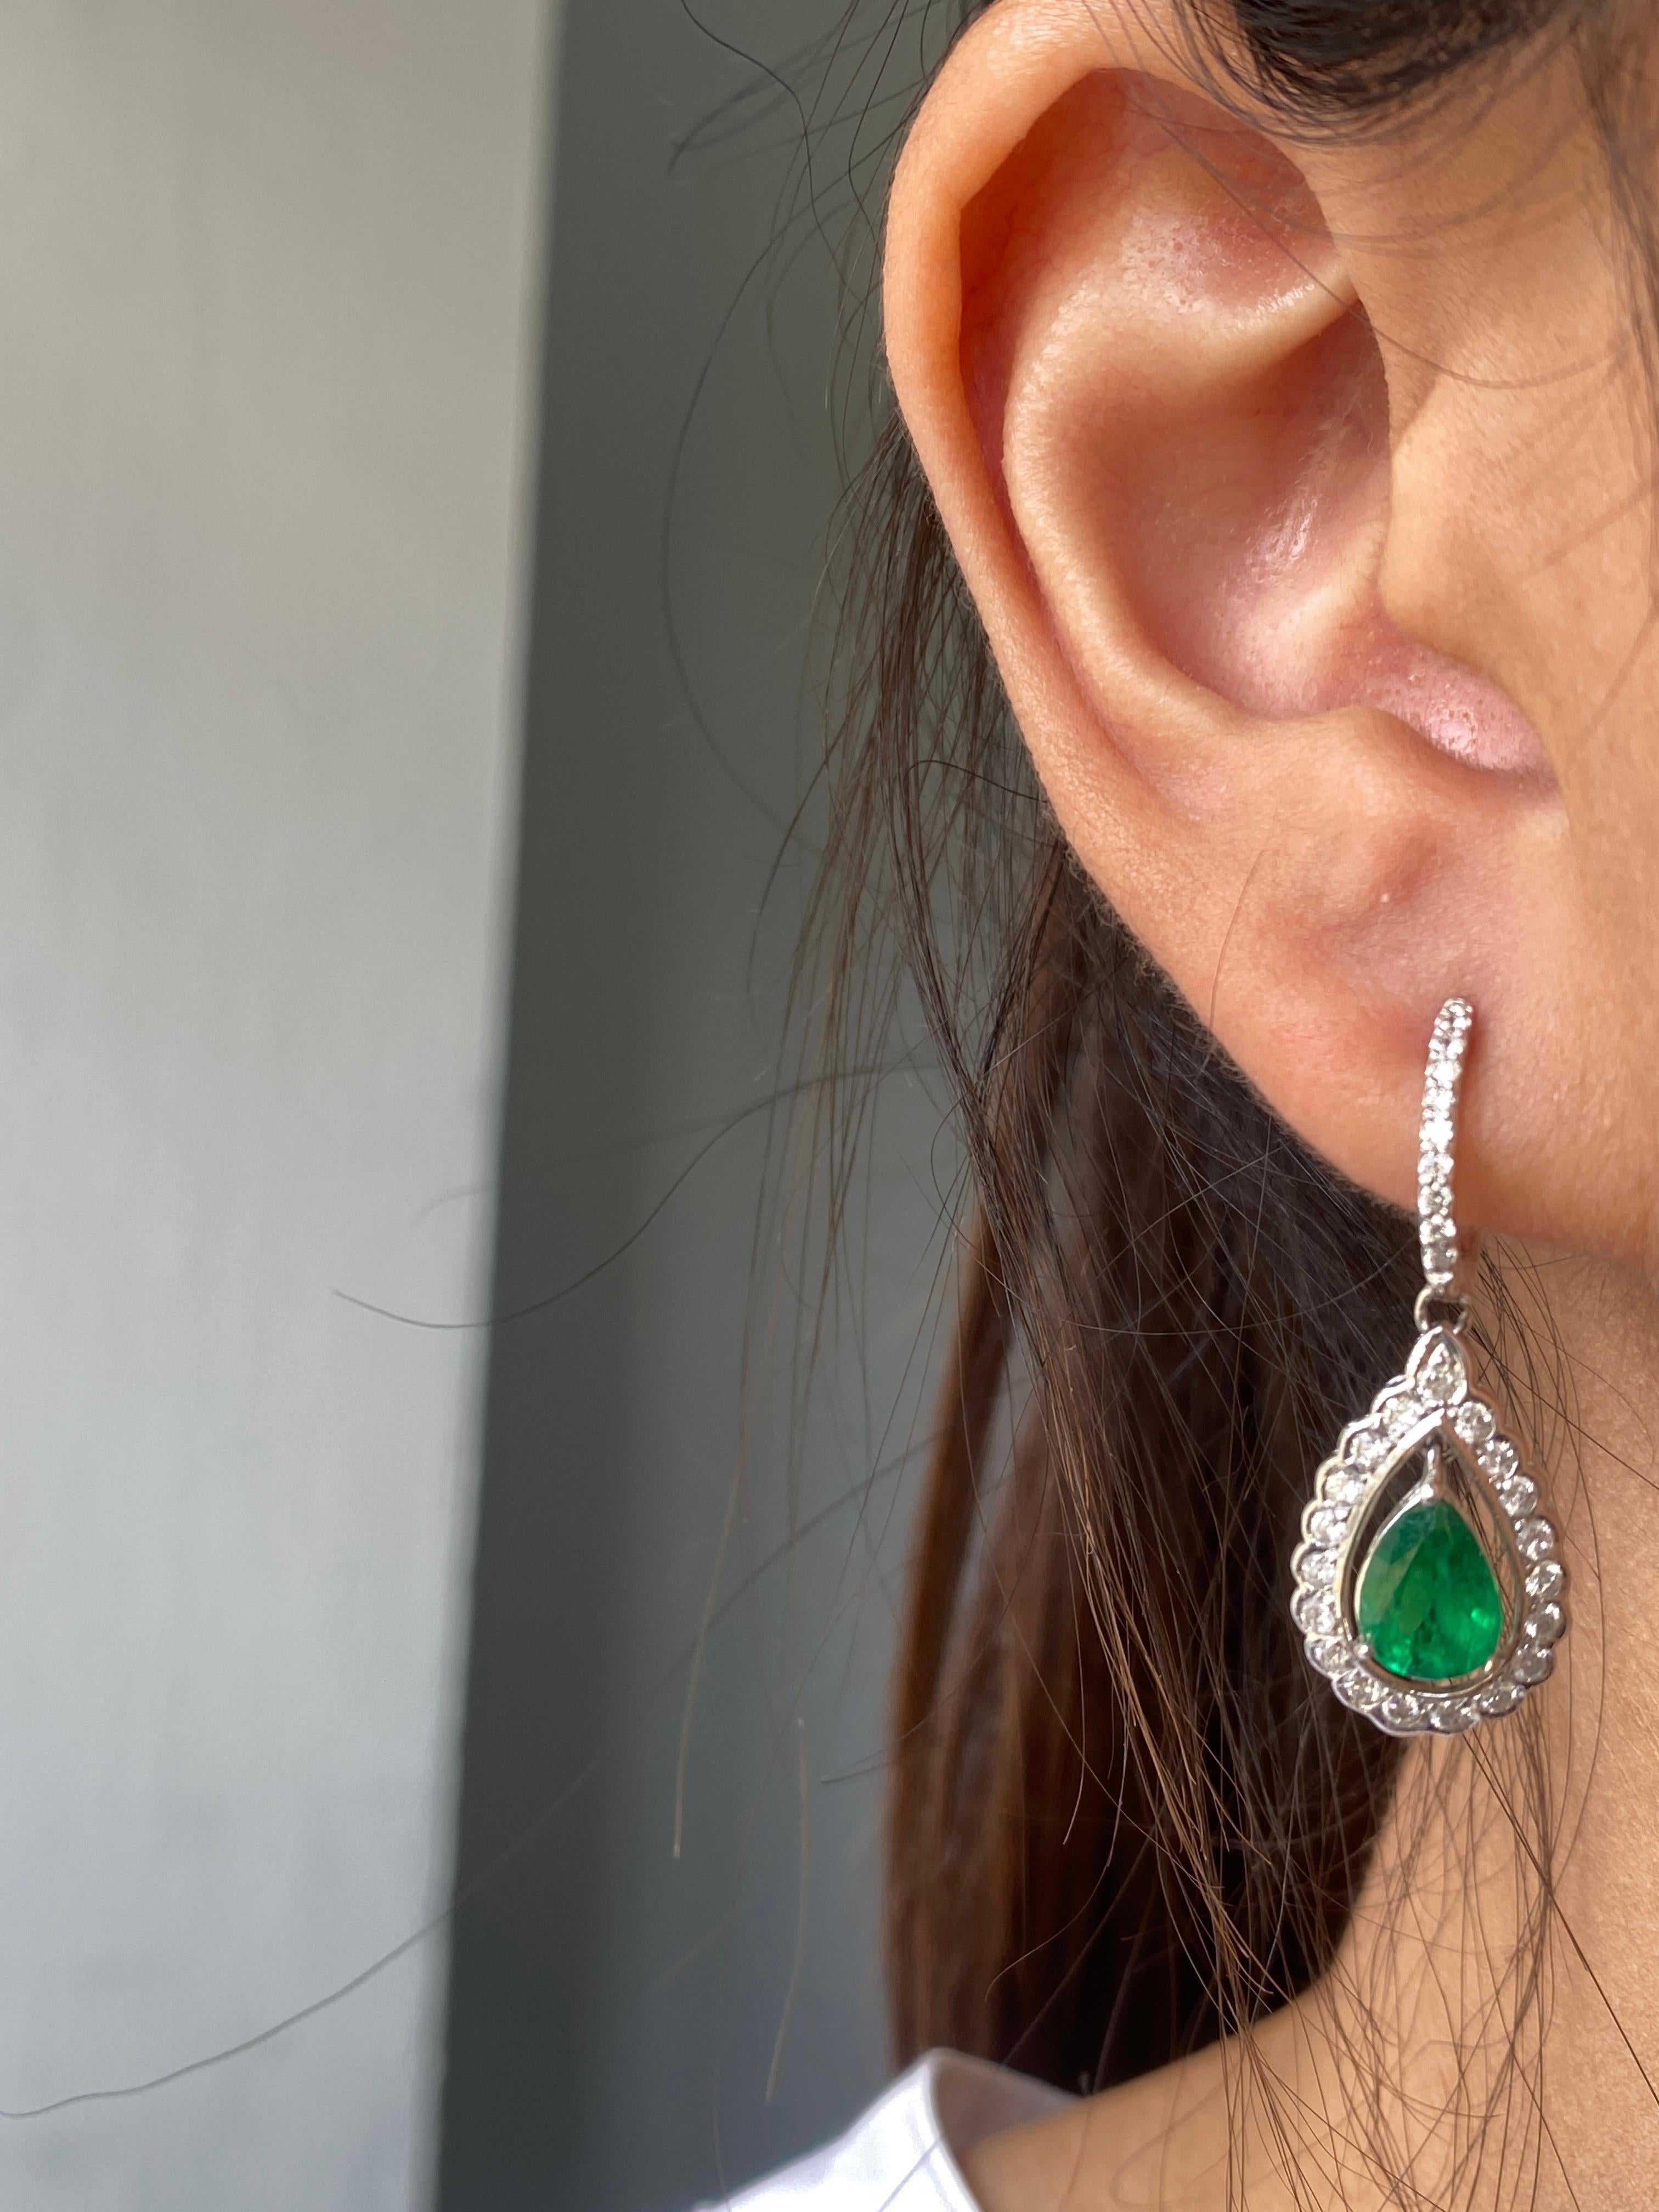 A pair of pear shape 2.14 carat Zambian Emeralds, adorned with 1.30 carat of White Diamonds, all set in 4.69 grams of solid 18K White Gold. The color of the Emeralds are ideal, vivid green, with great luster.
The earrings are around 2.5cm long.
We